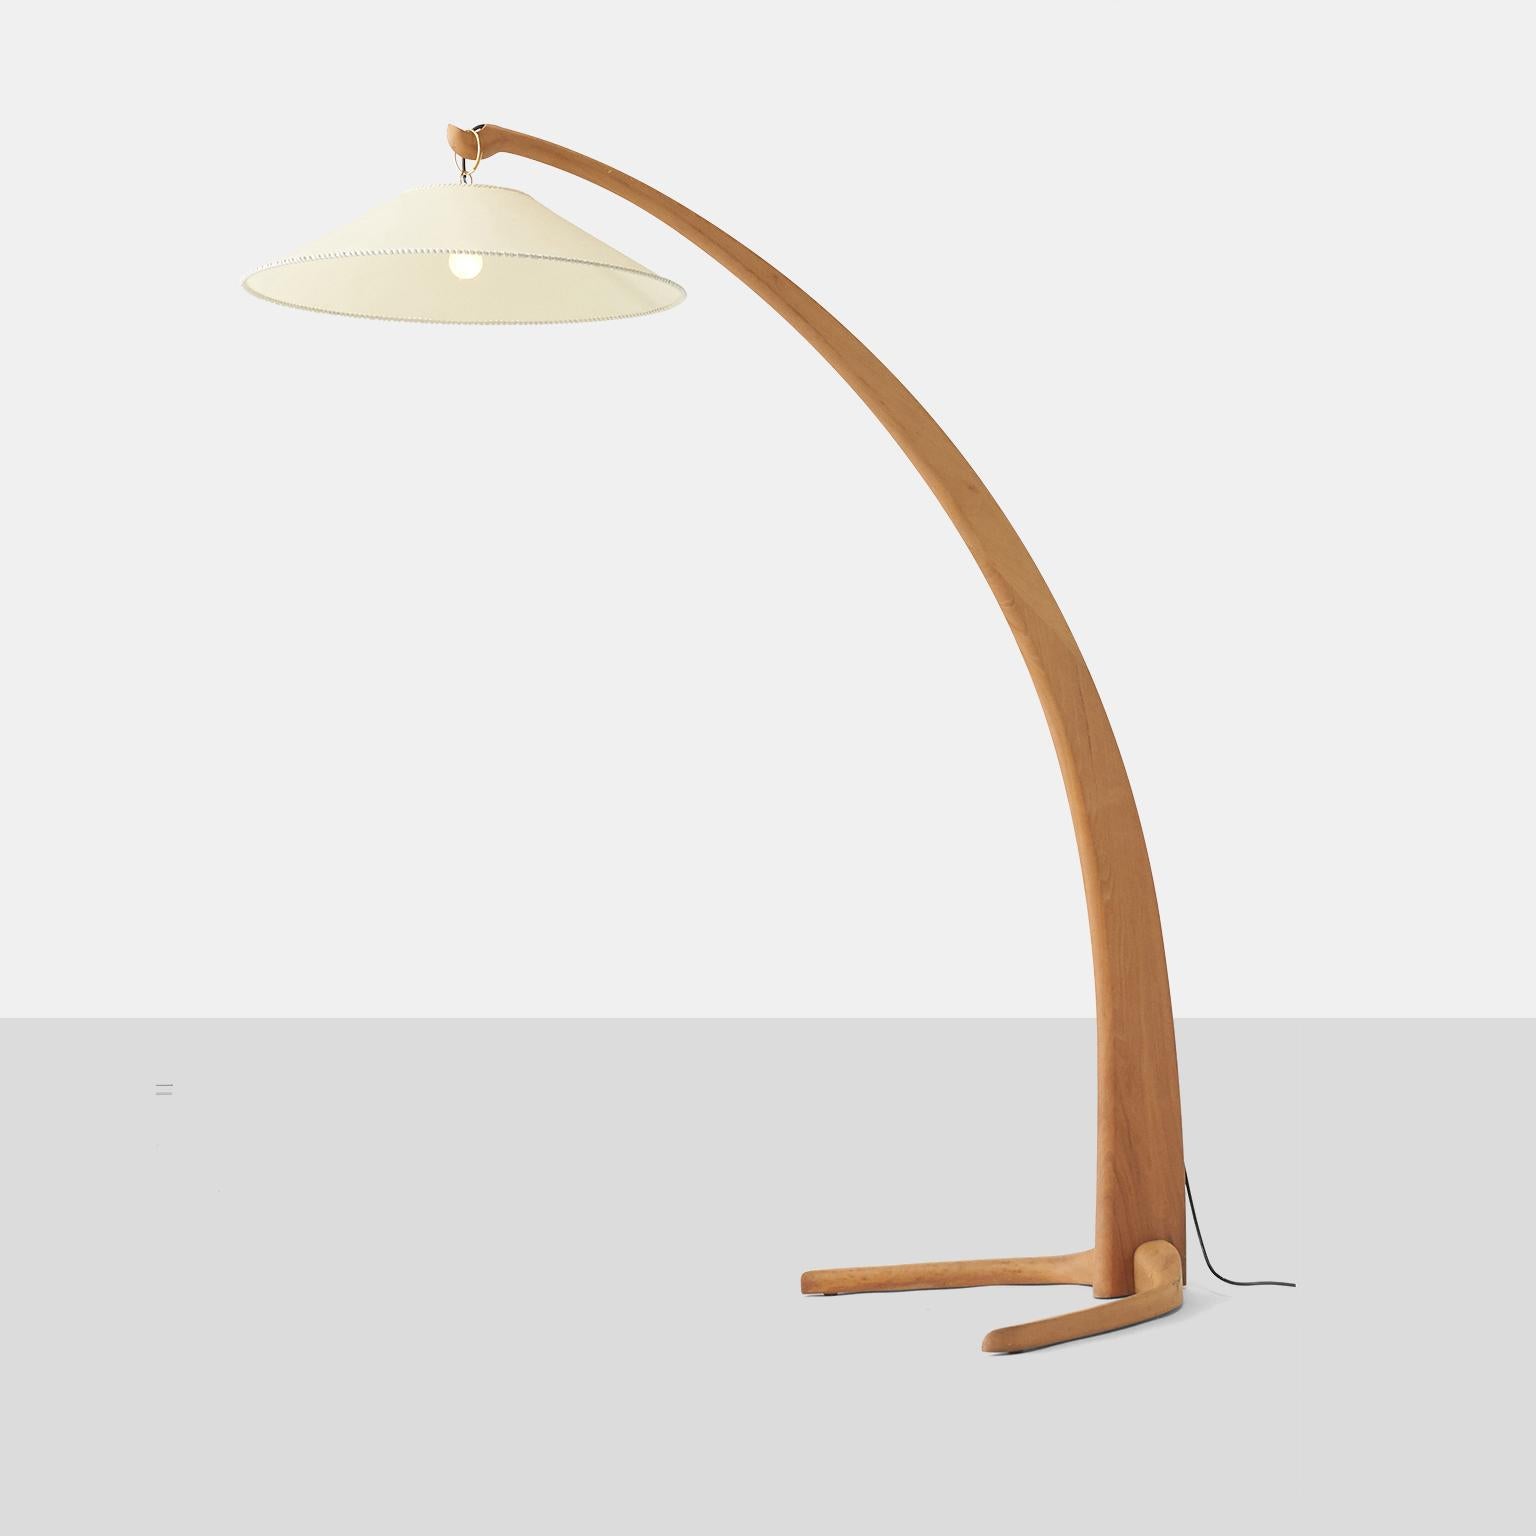 A beautiful Italian floor lamp with an arced walnut frame and paper shade suspended from a brass loop. Designed in the 1940s and produced in the 1980s.

Some very slight scratches and imperfections to the wood. Some imperfections and marks on the